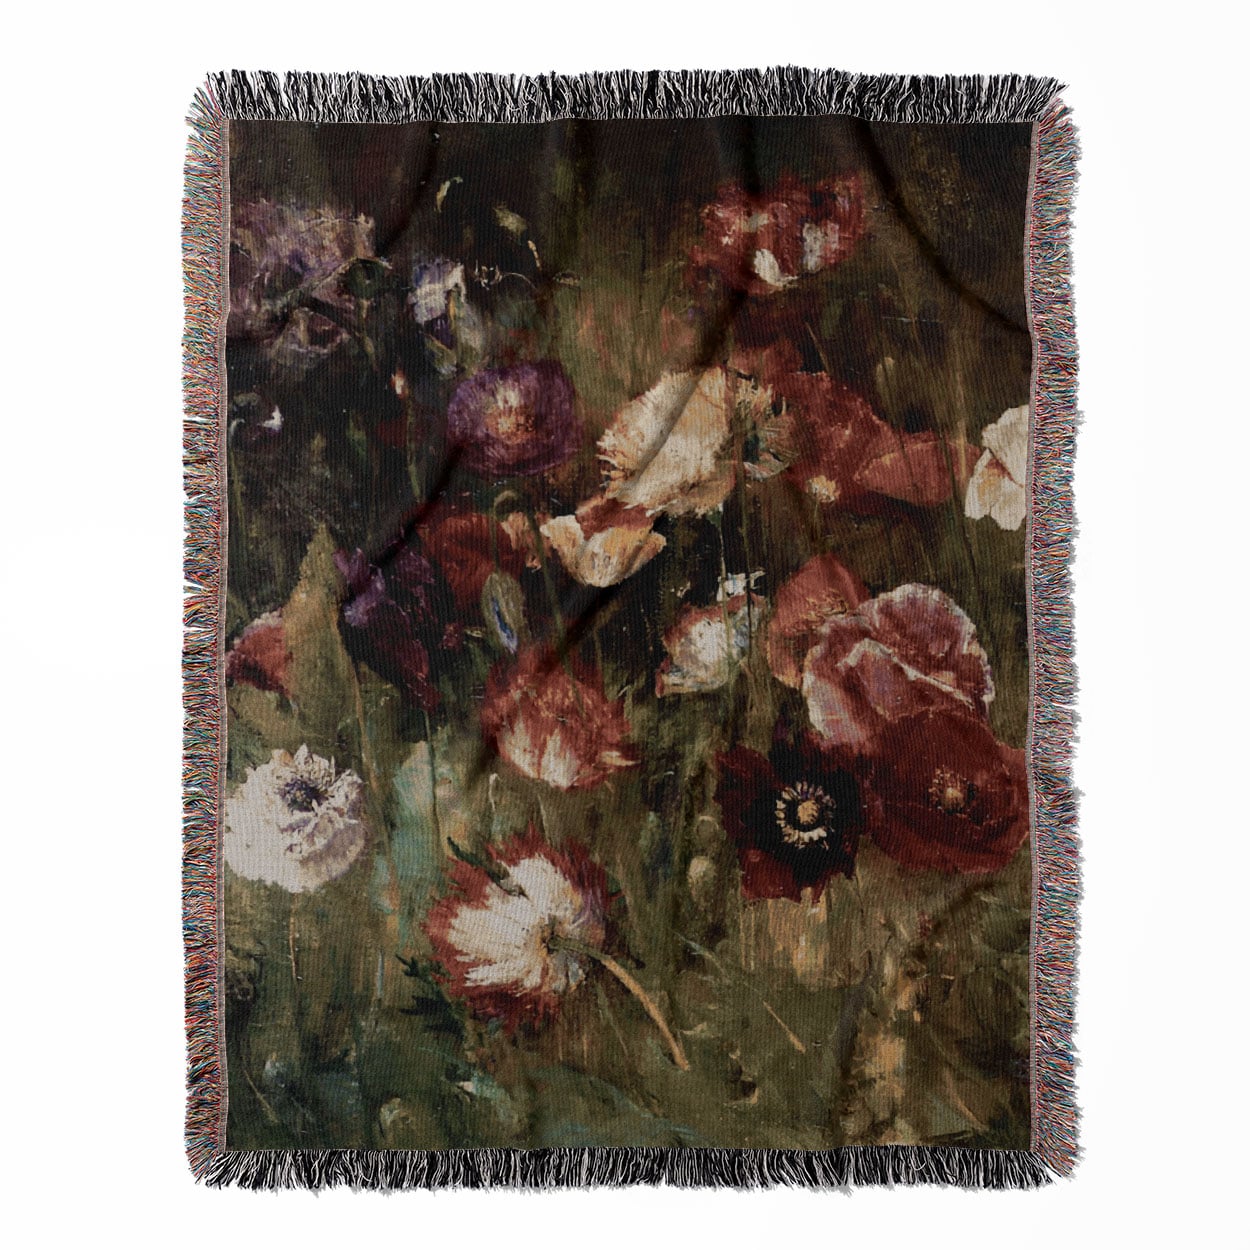 Abstract Flower woven throw blanket, crafted from 100% cotton, featuring a soft and cozy texture with impressionist flower designs for home decor.